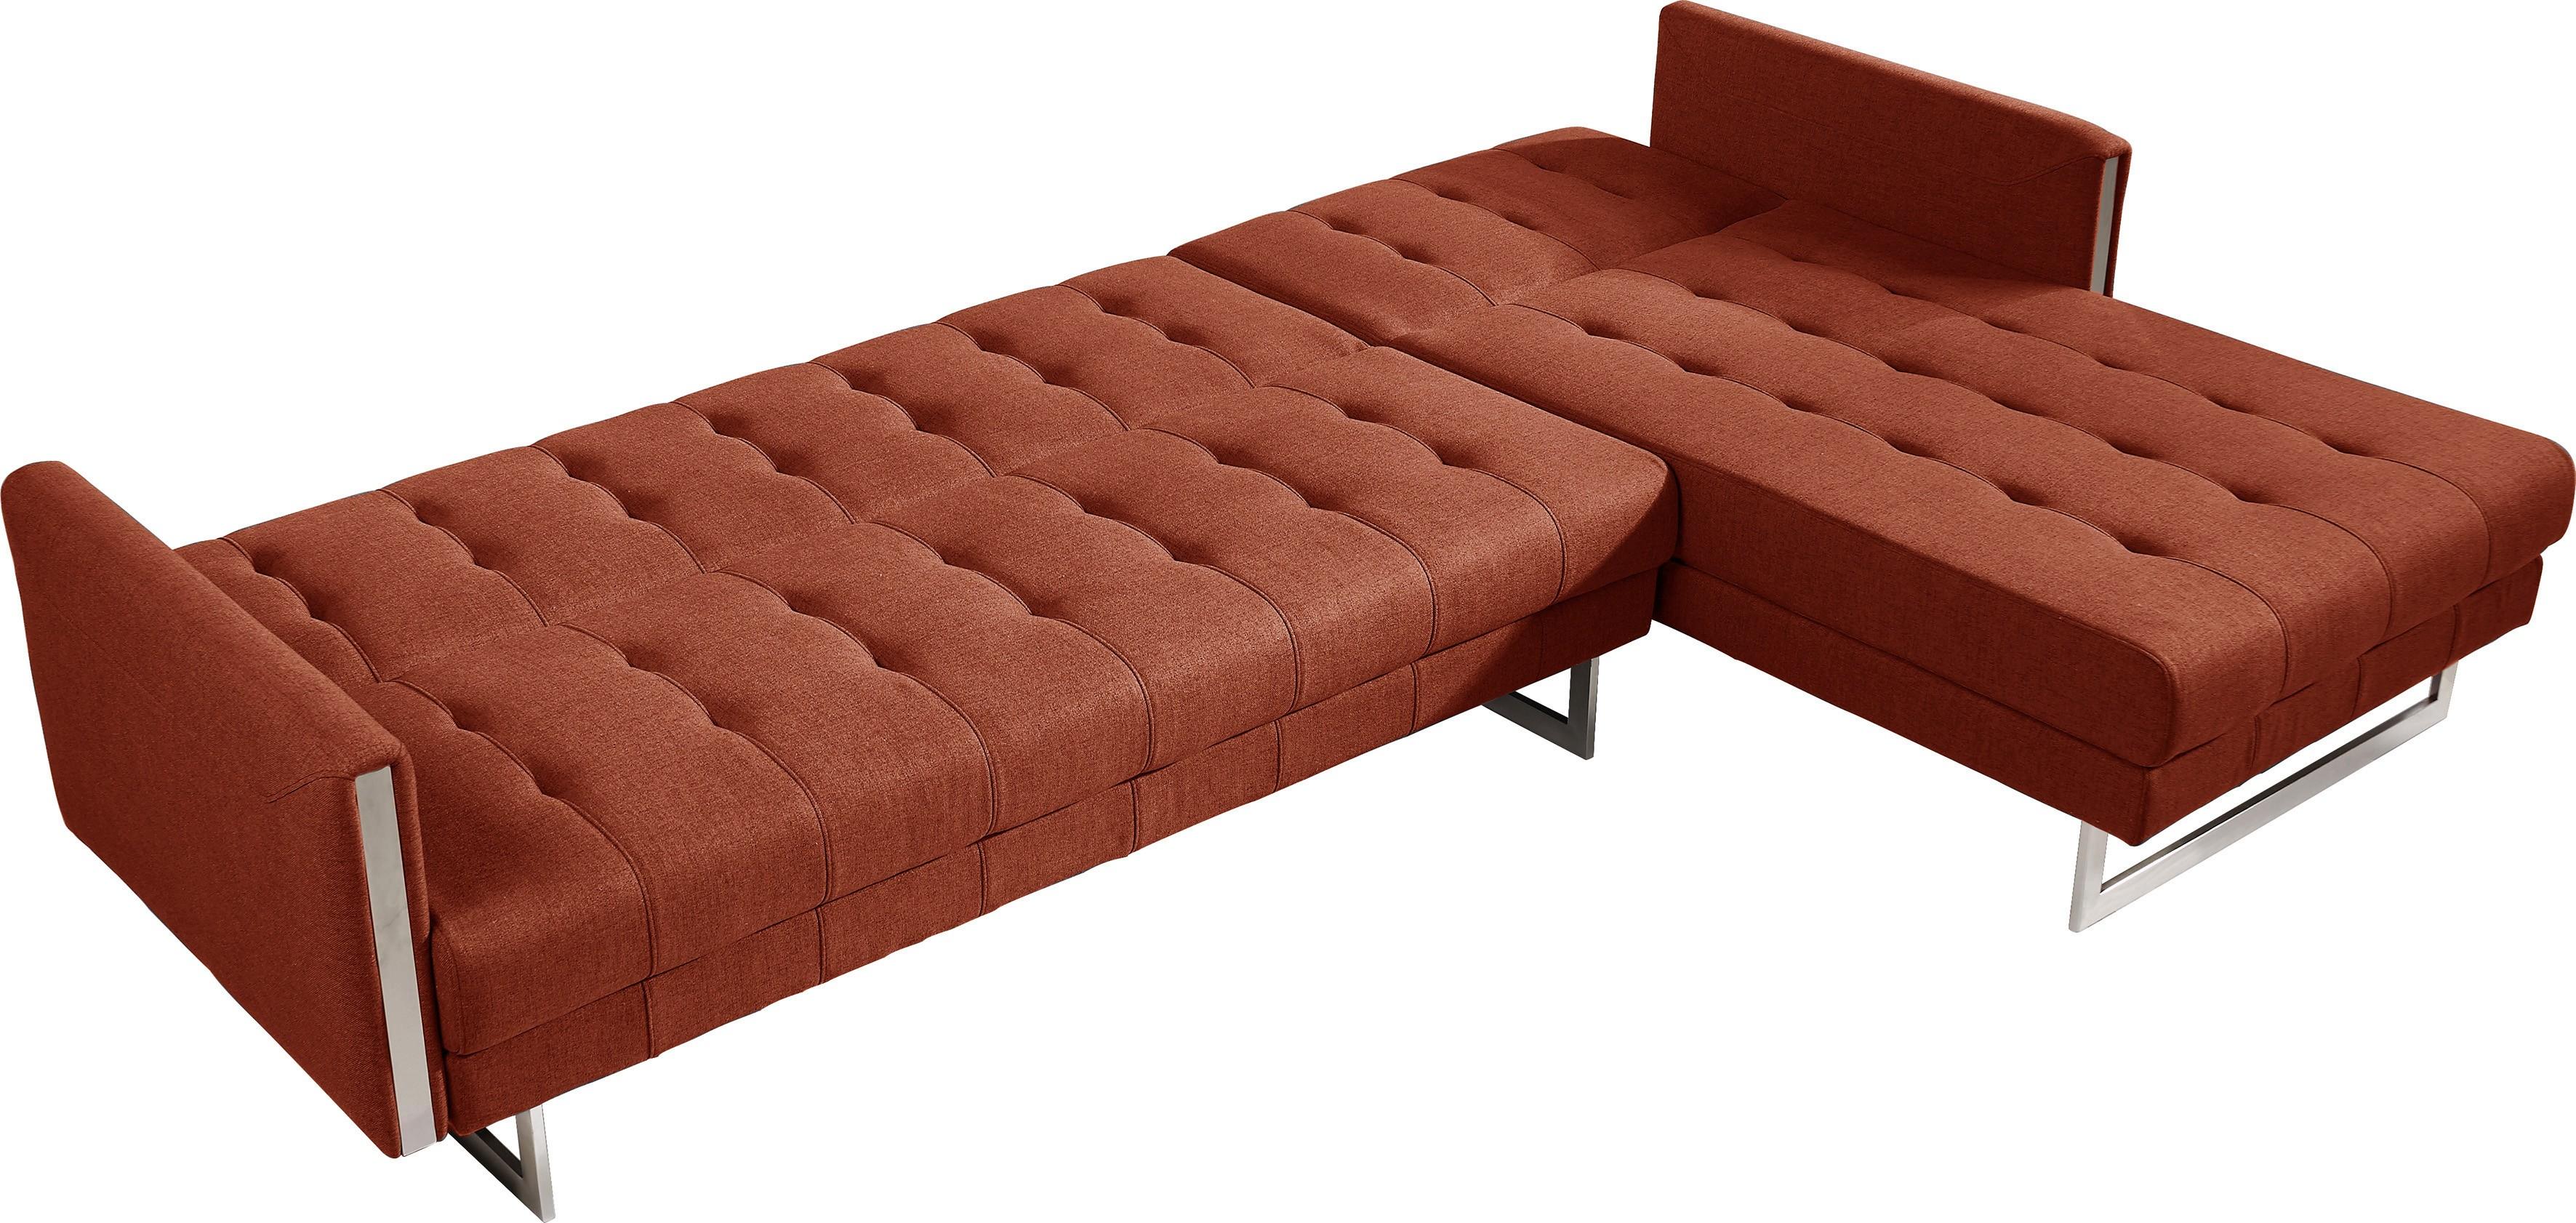 

    
At Home USA Andrea Flaming Orange Tufted Fabric Sectional Sofa Bed Contemporary
